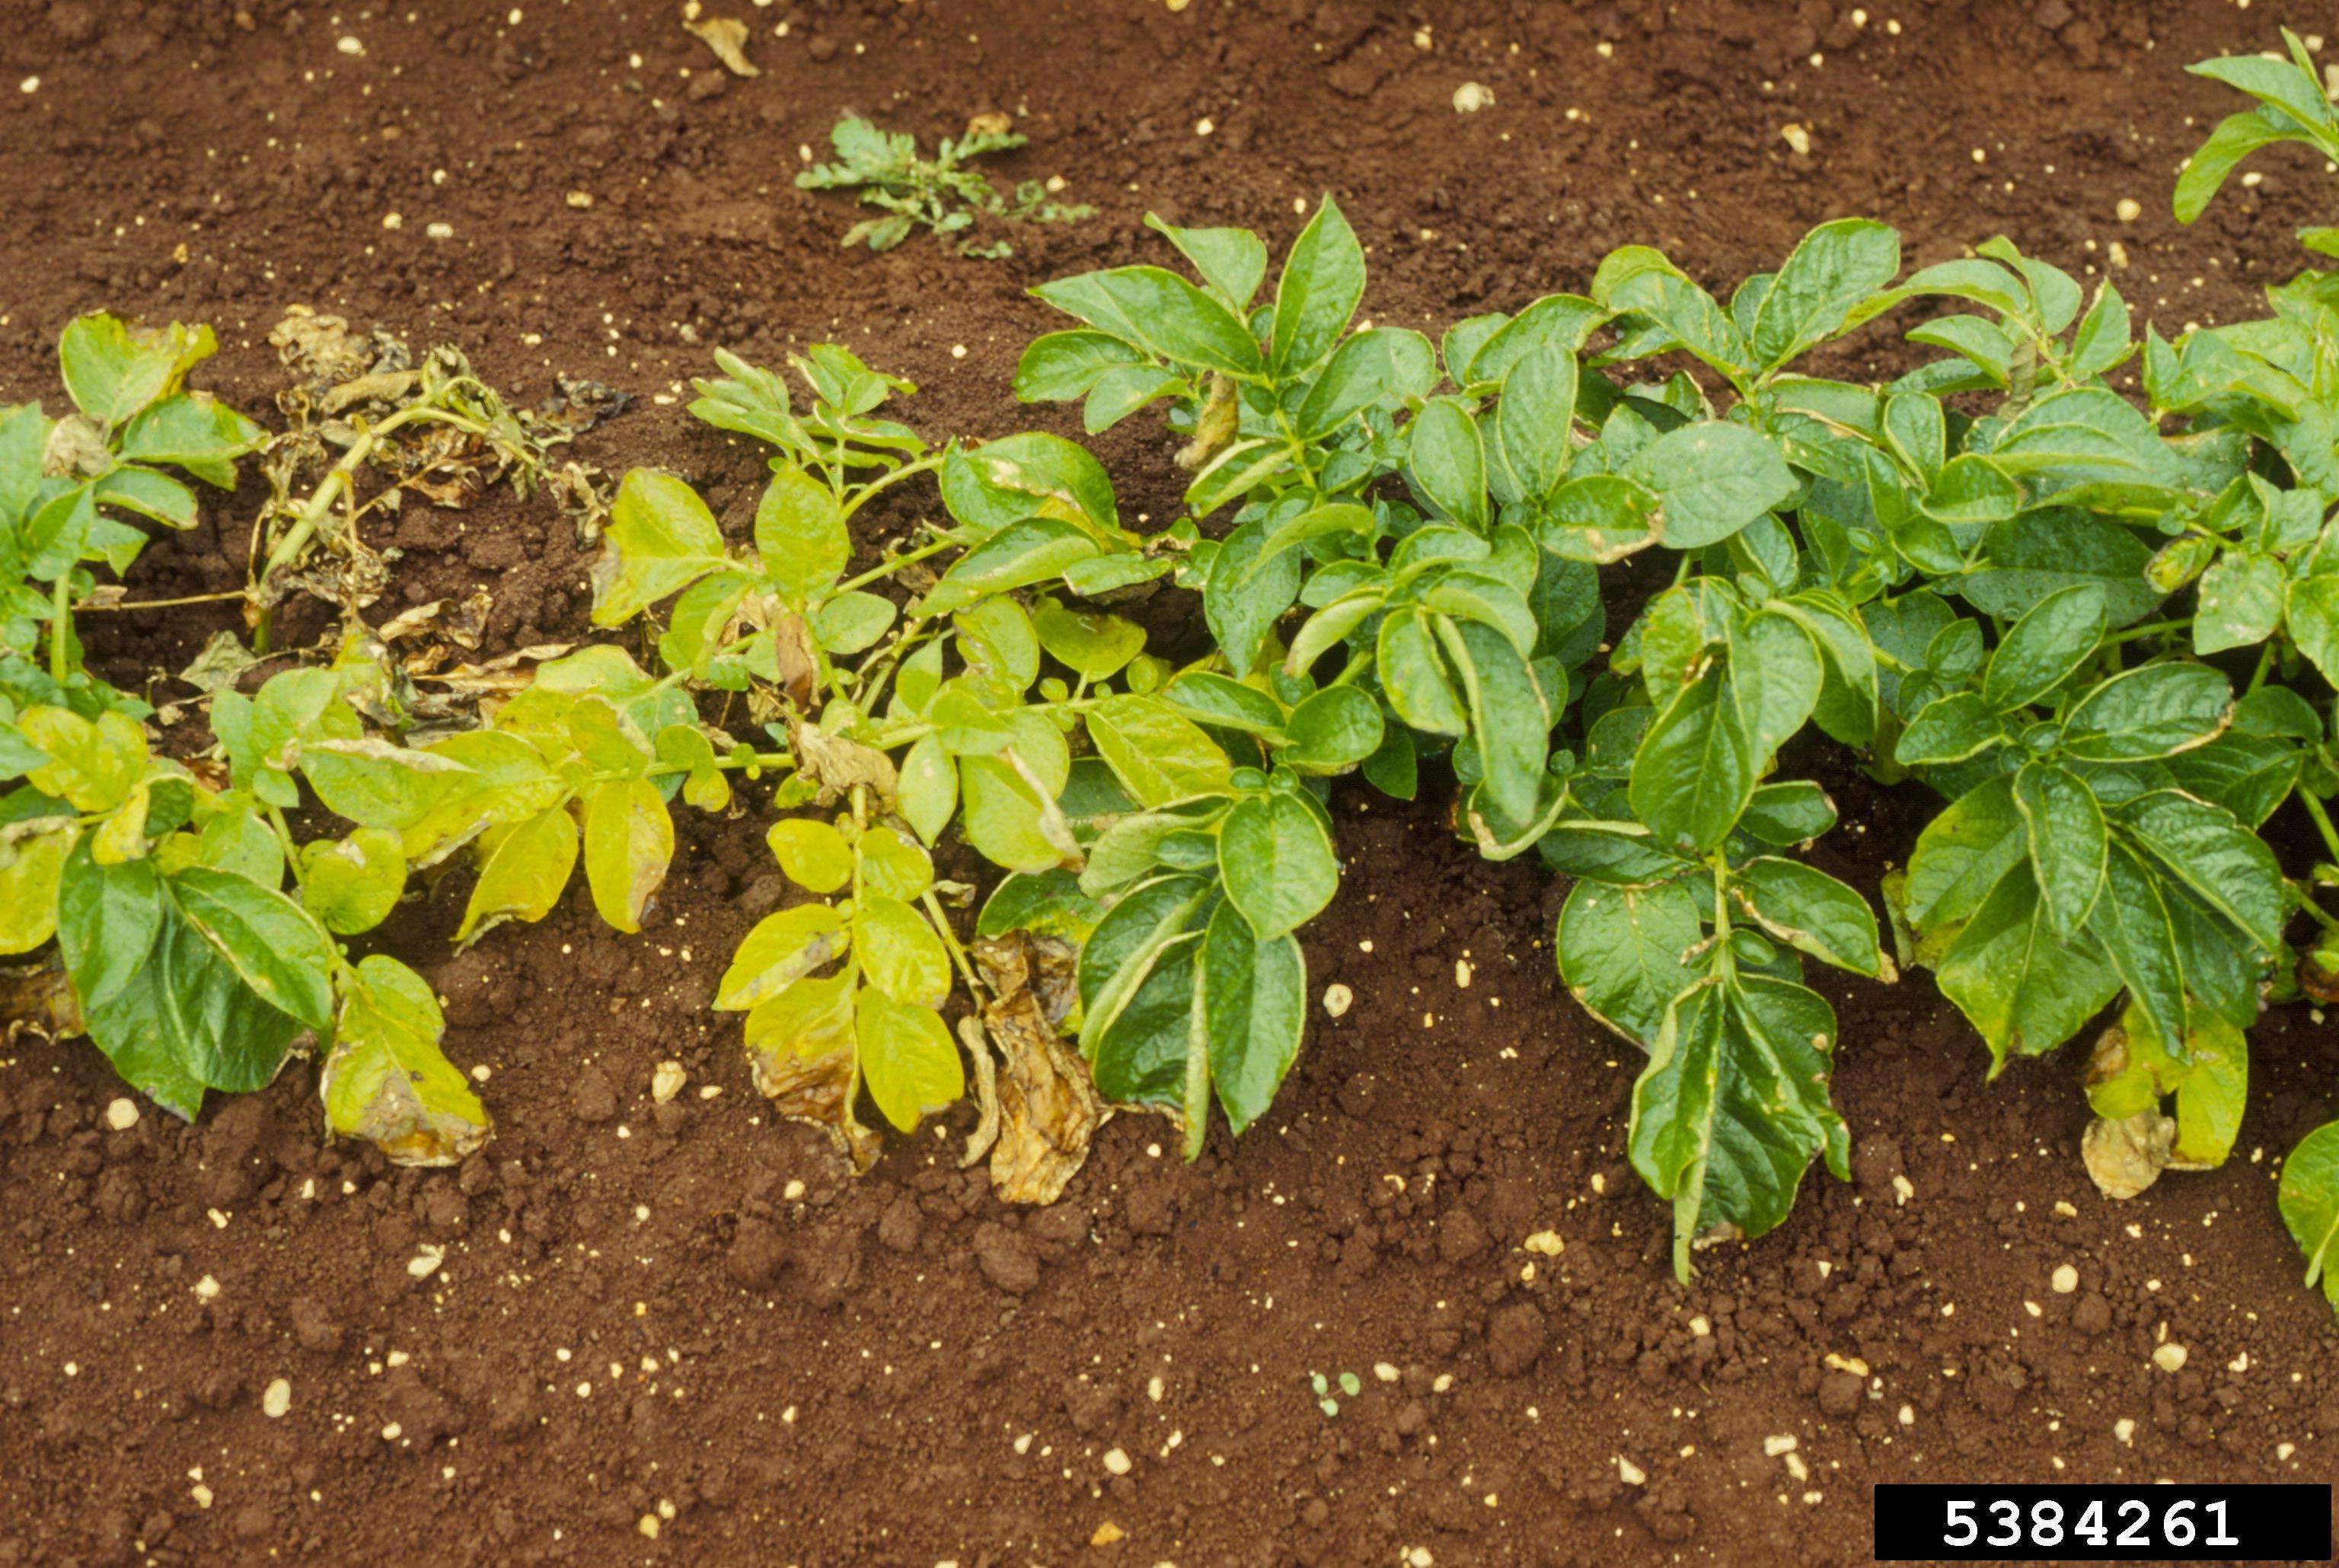 Row of potato plants with yellowing, wilting leaves.